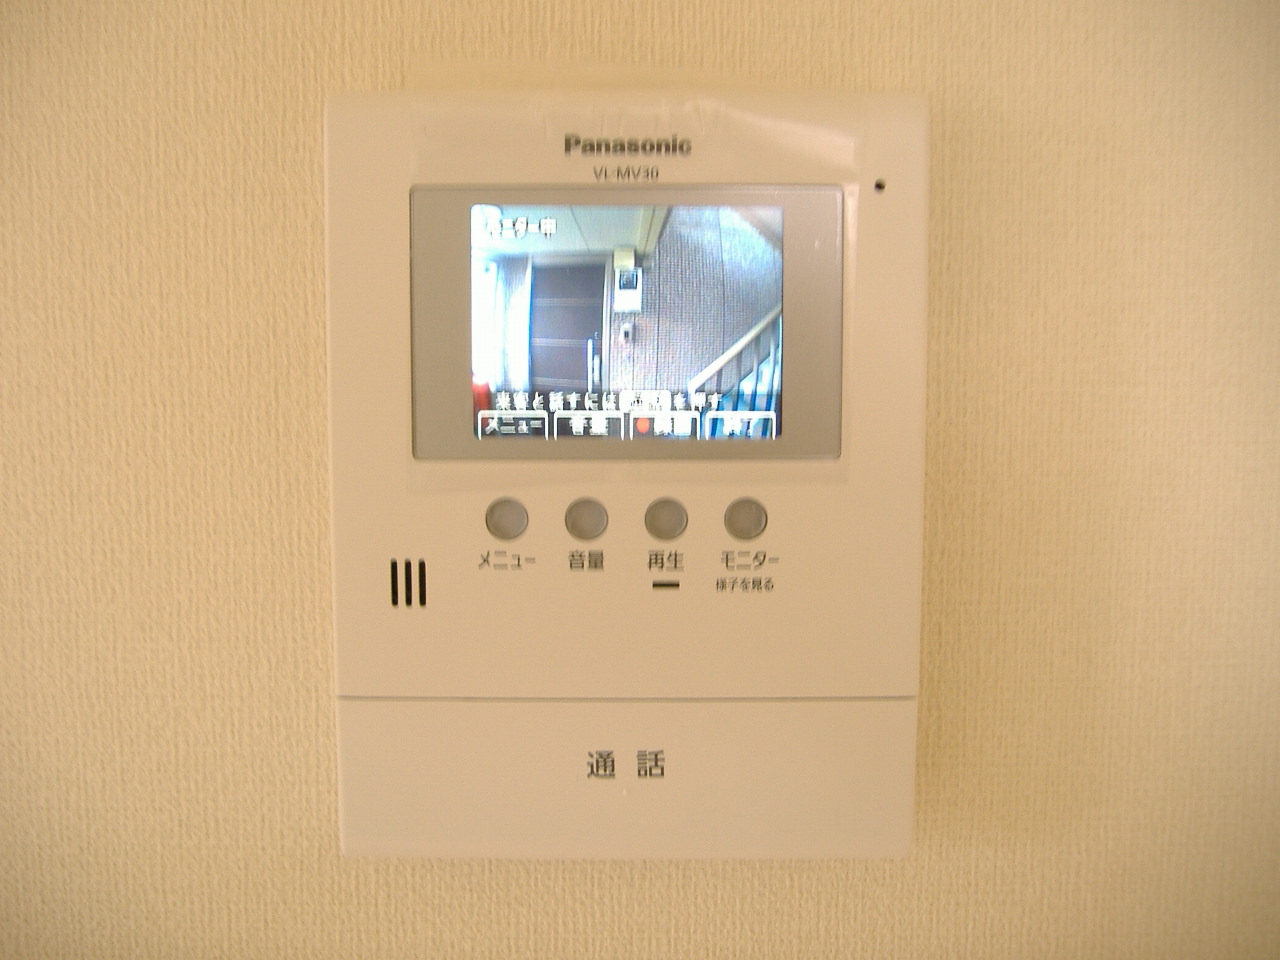 Security. Intercom with a recording function